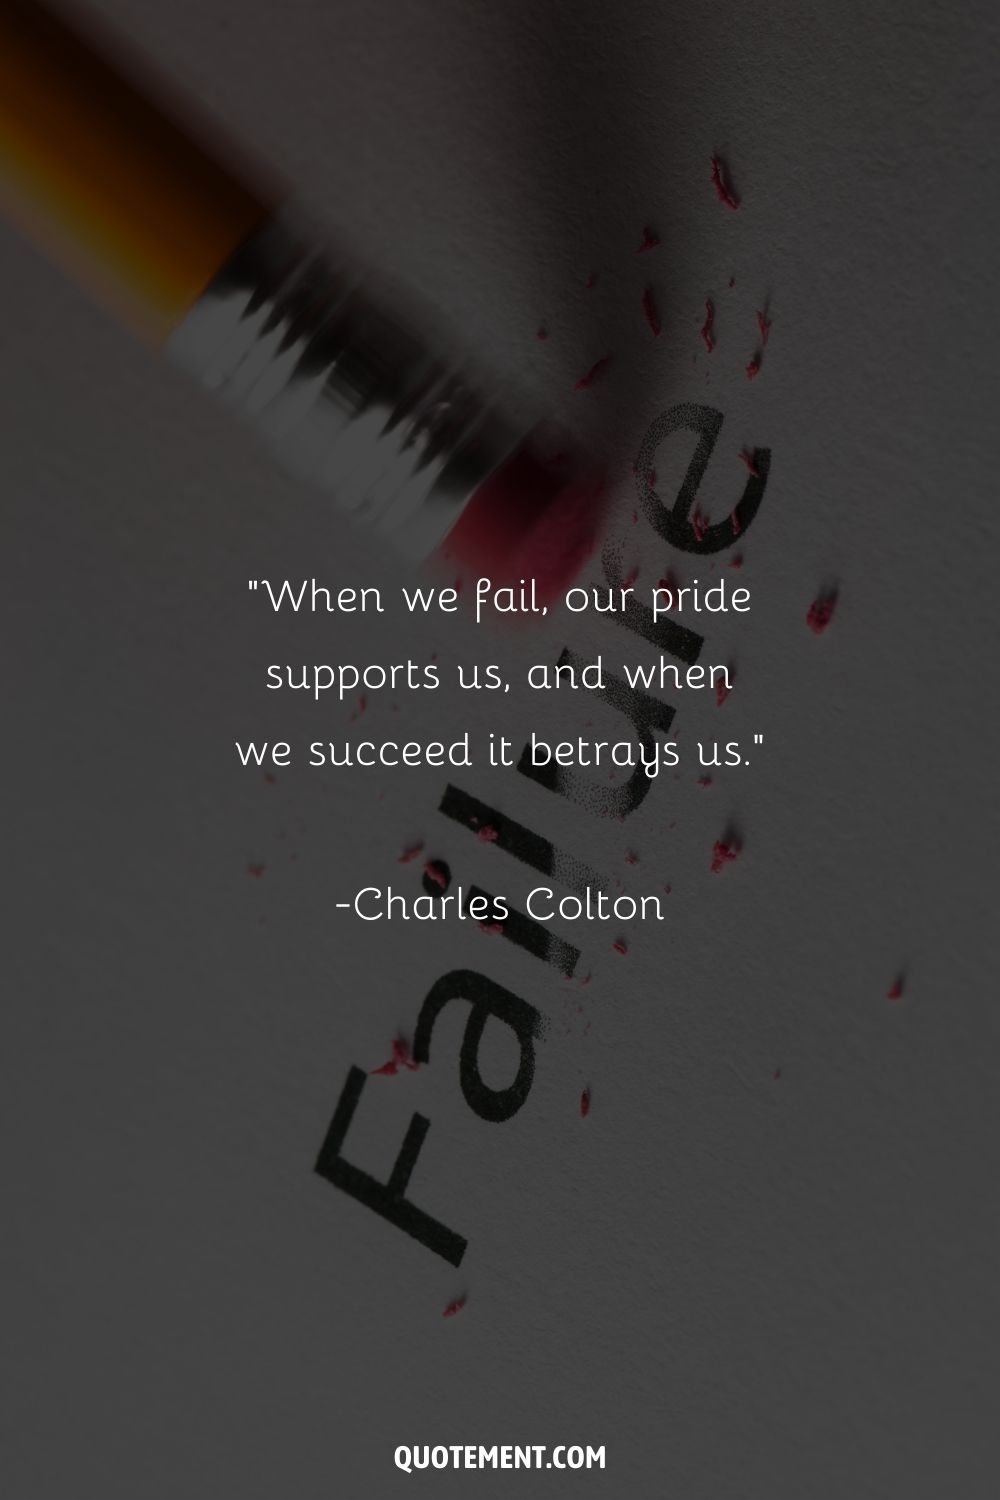 “When we fail, our pride supports us, and when we succeed it betrays us.” ― Charles Colton